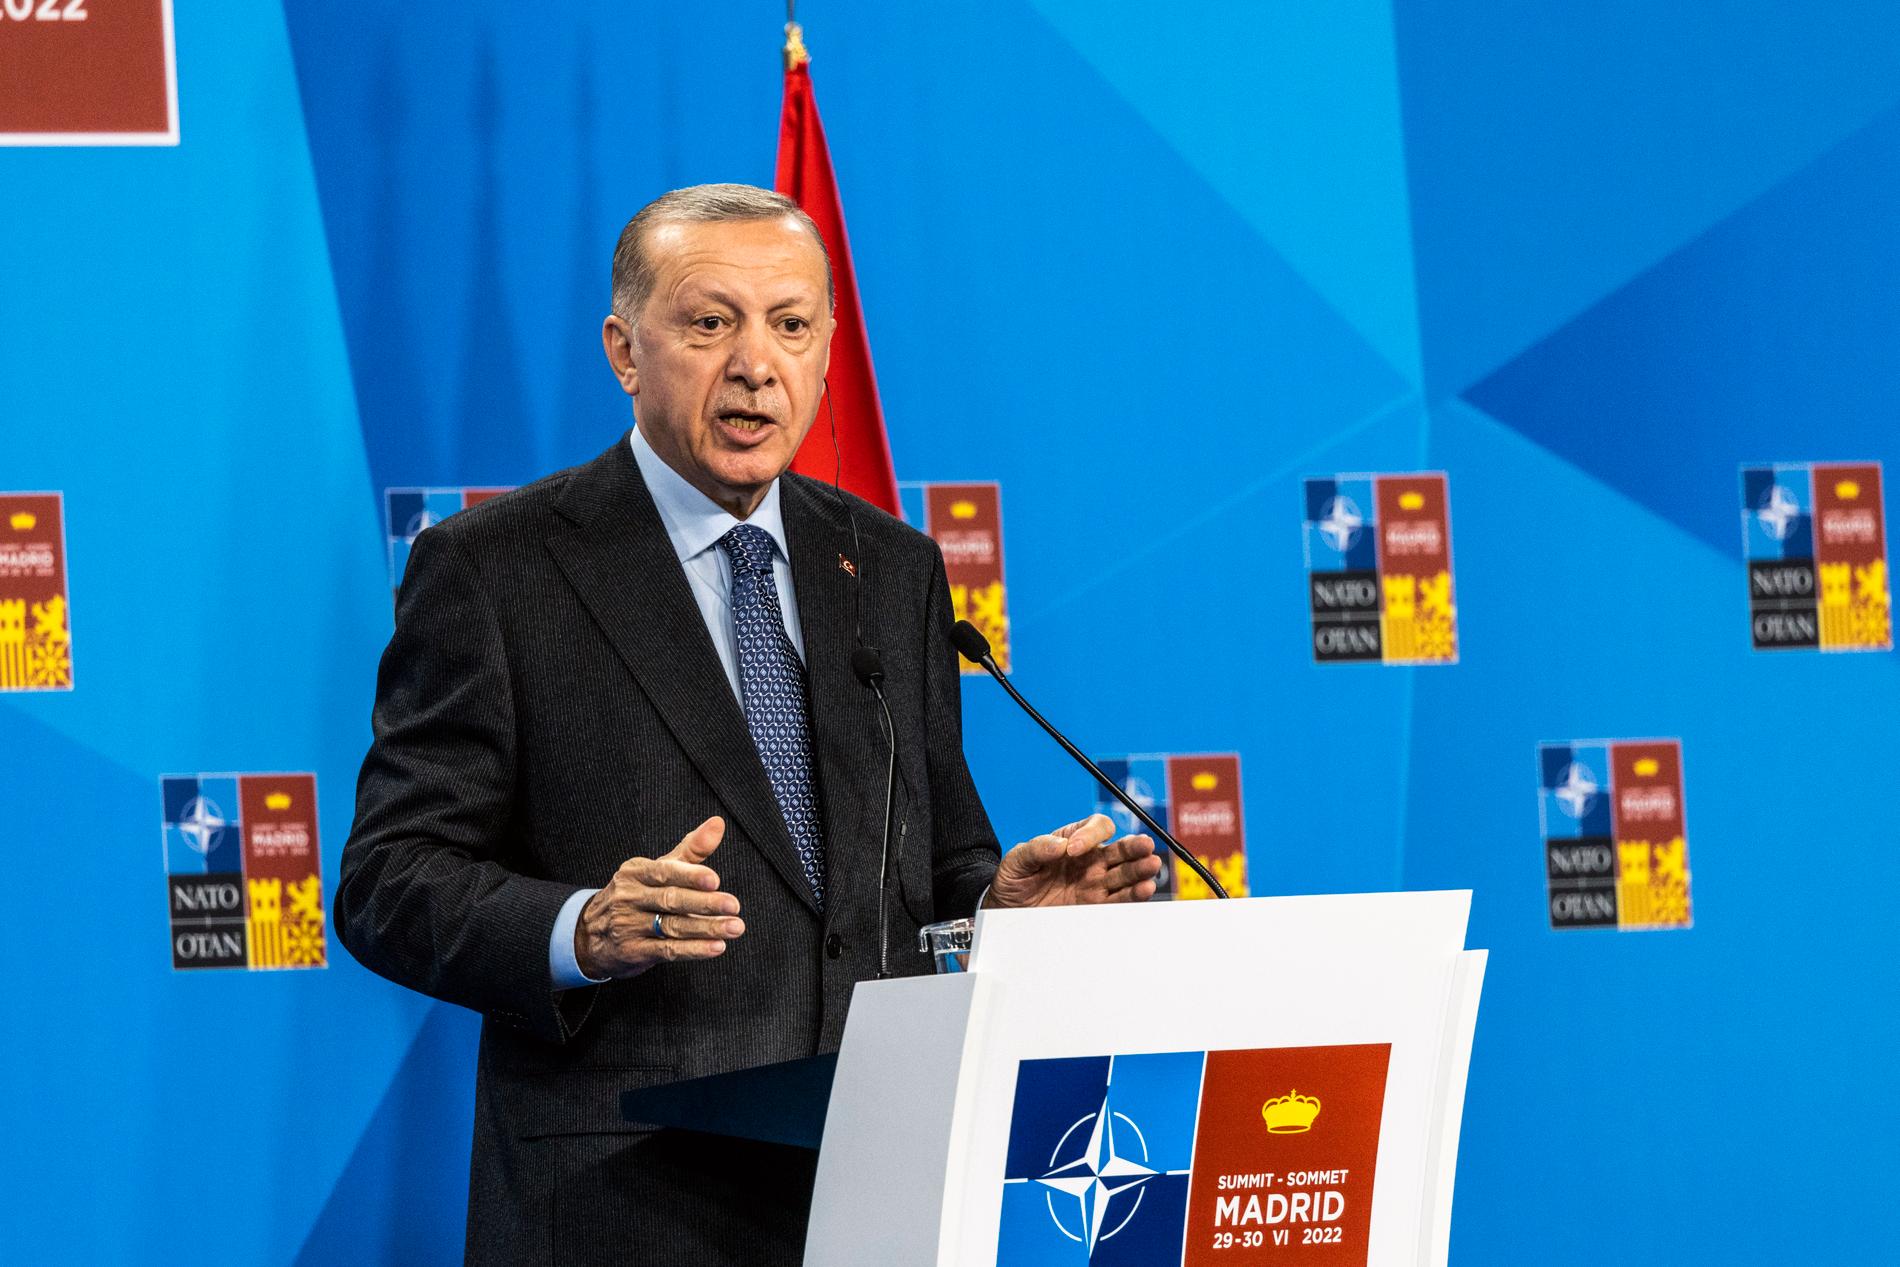 Erdogan threatens to freeze Finland and Sweden membership in NATO - VG